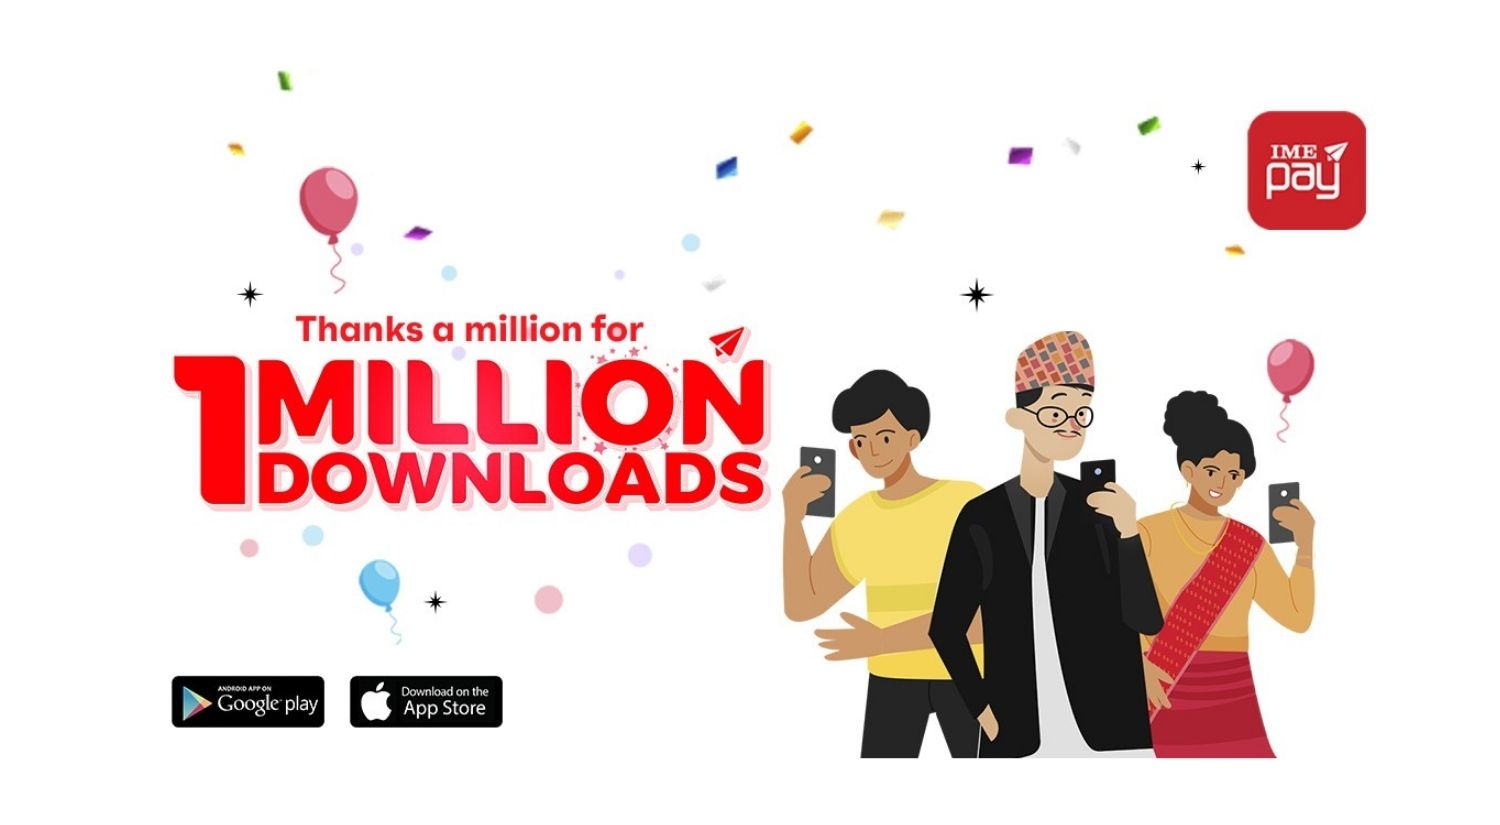 IME pay App download 1 million